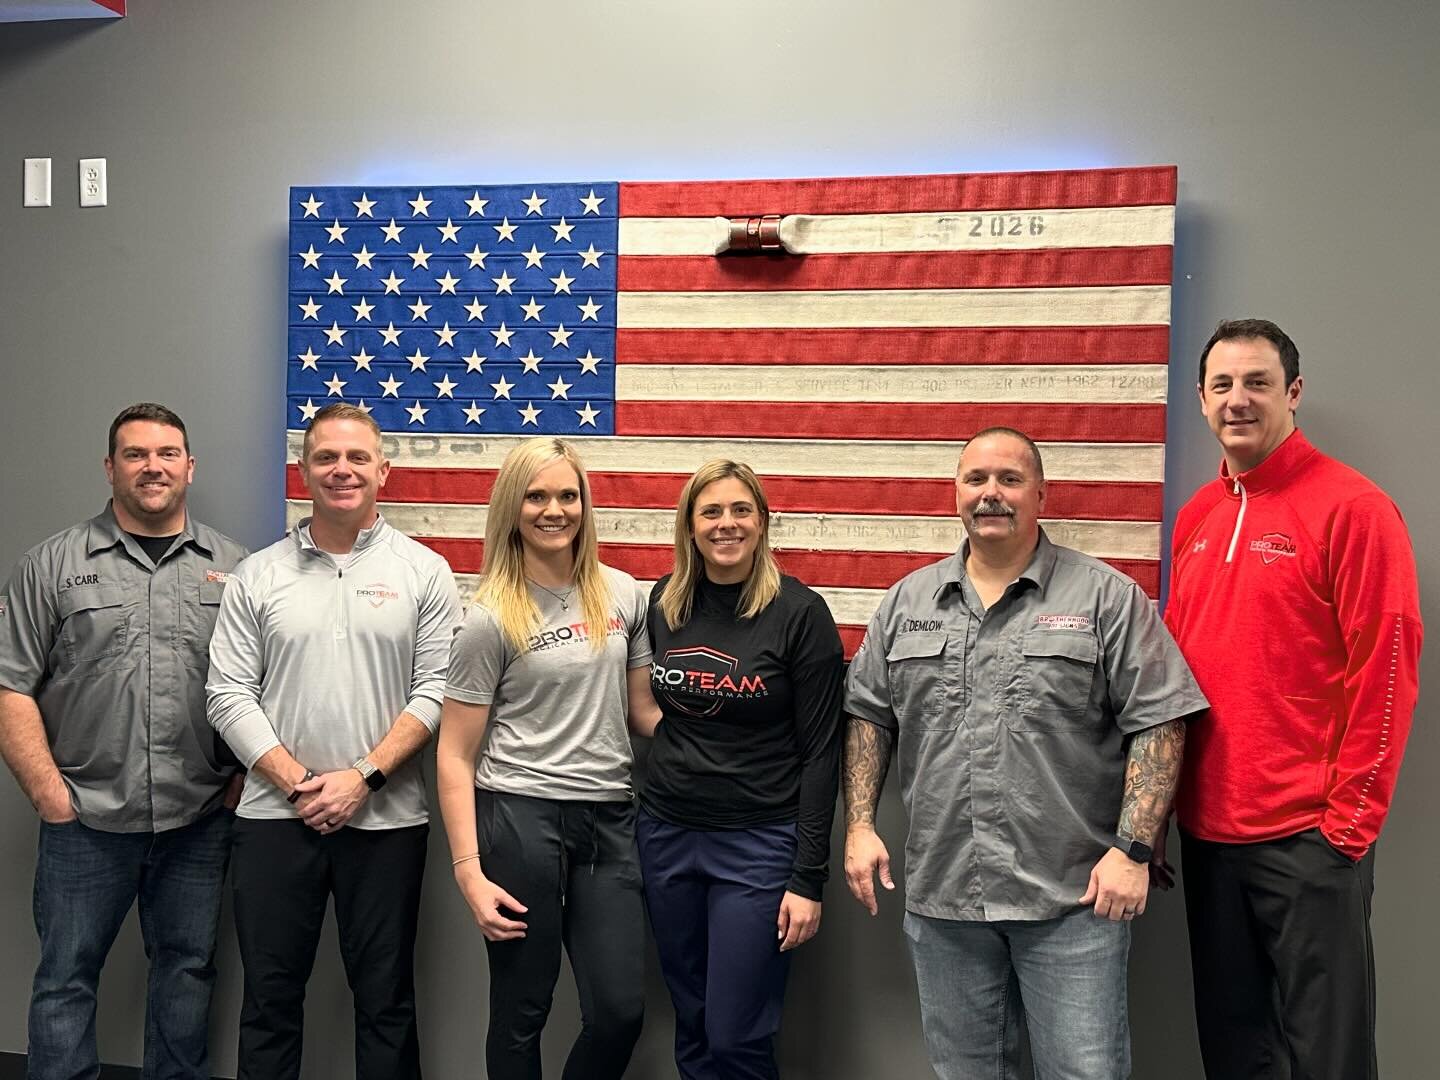 Yesterday, @brotherhooddesignsllc was happy to install flag #66 at the Westfield location for @proteamtactical.  Owner Jim Sorgi, Director of Business Development David Smith and clinicians Nicole and Kalie were happy to accept the flag and get a pic